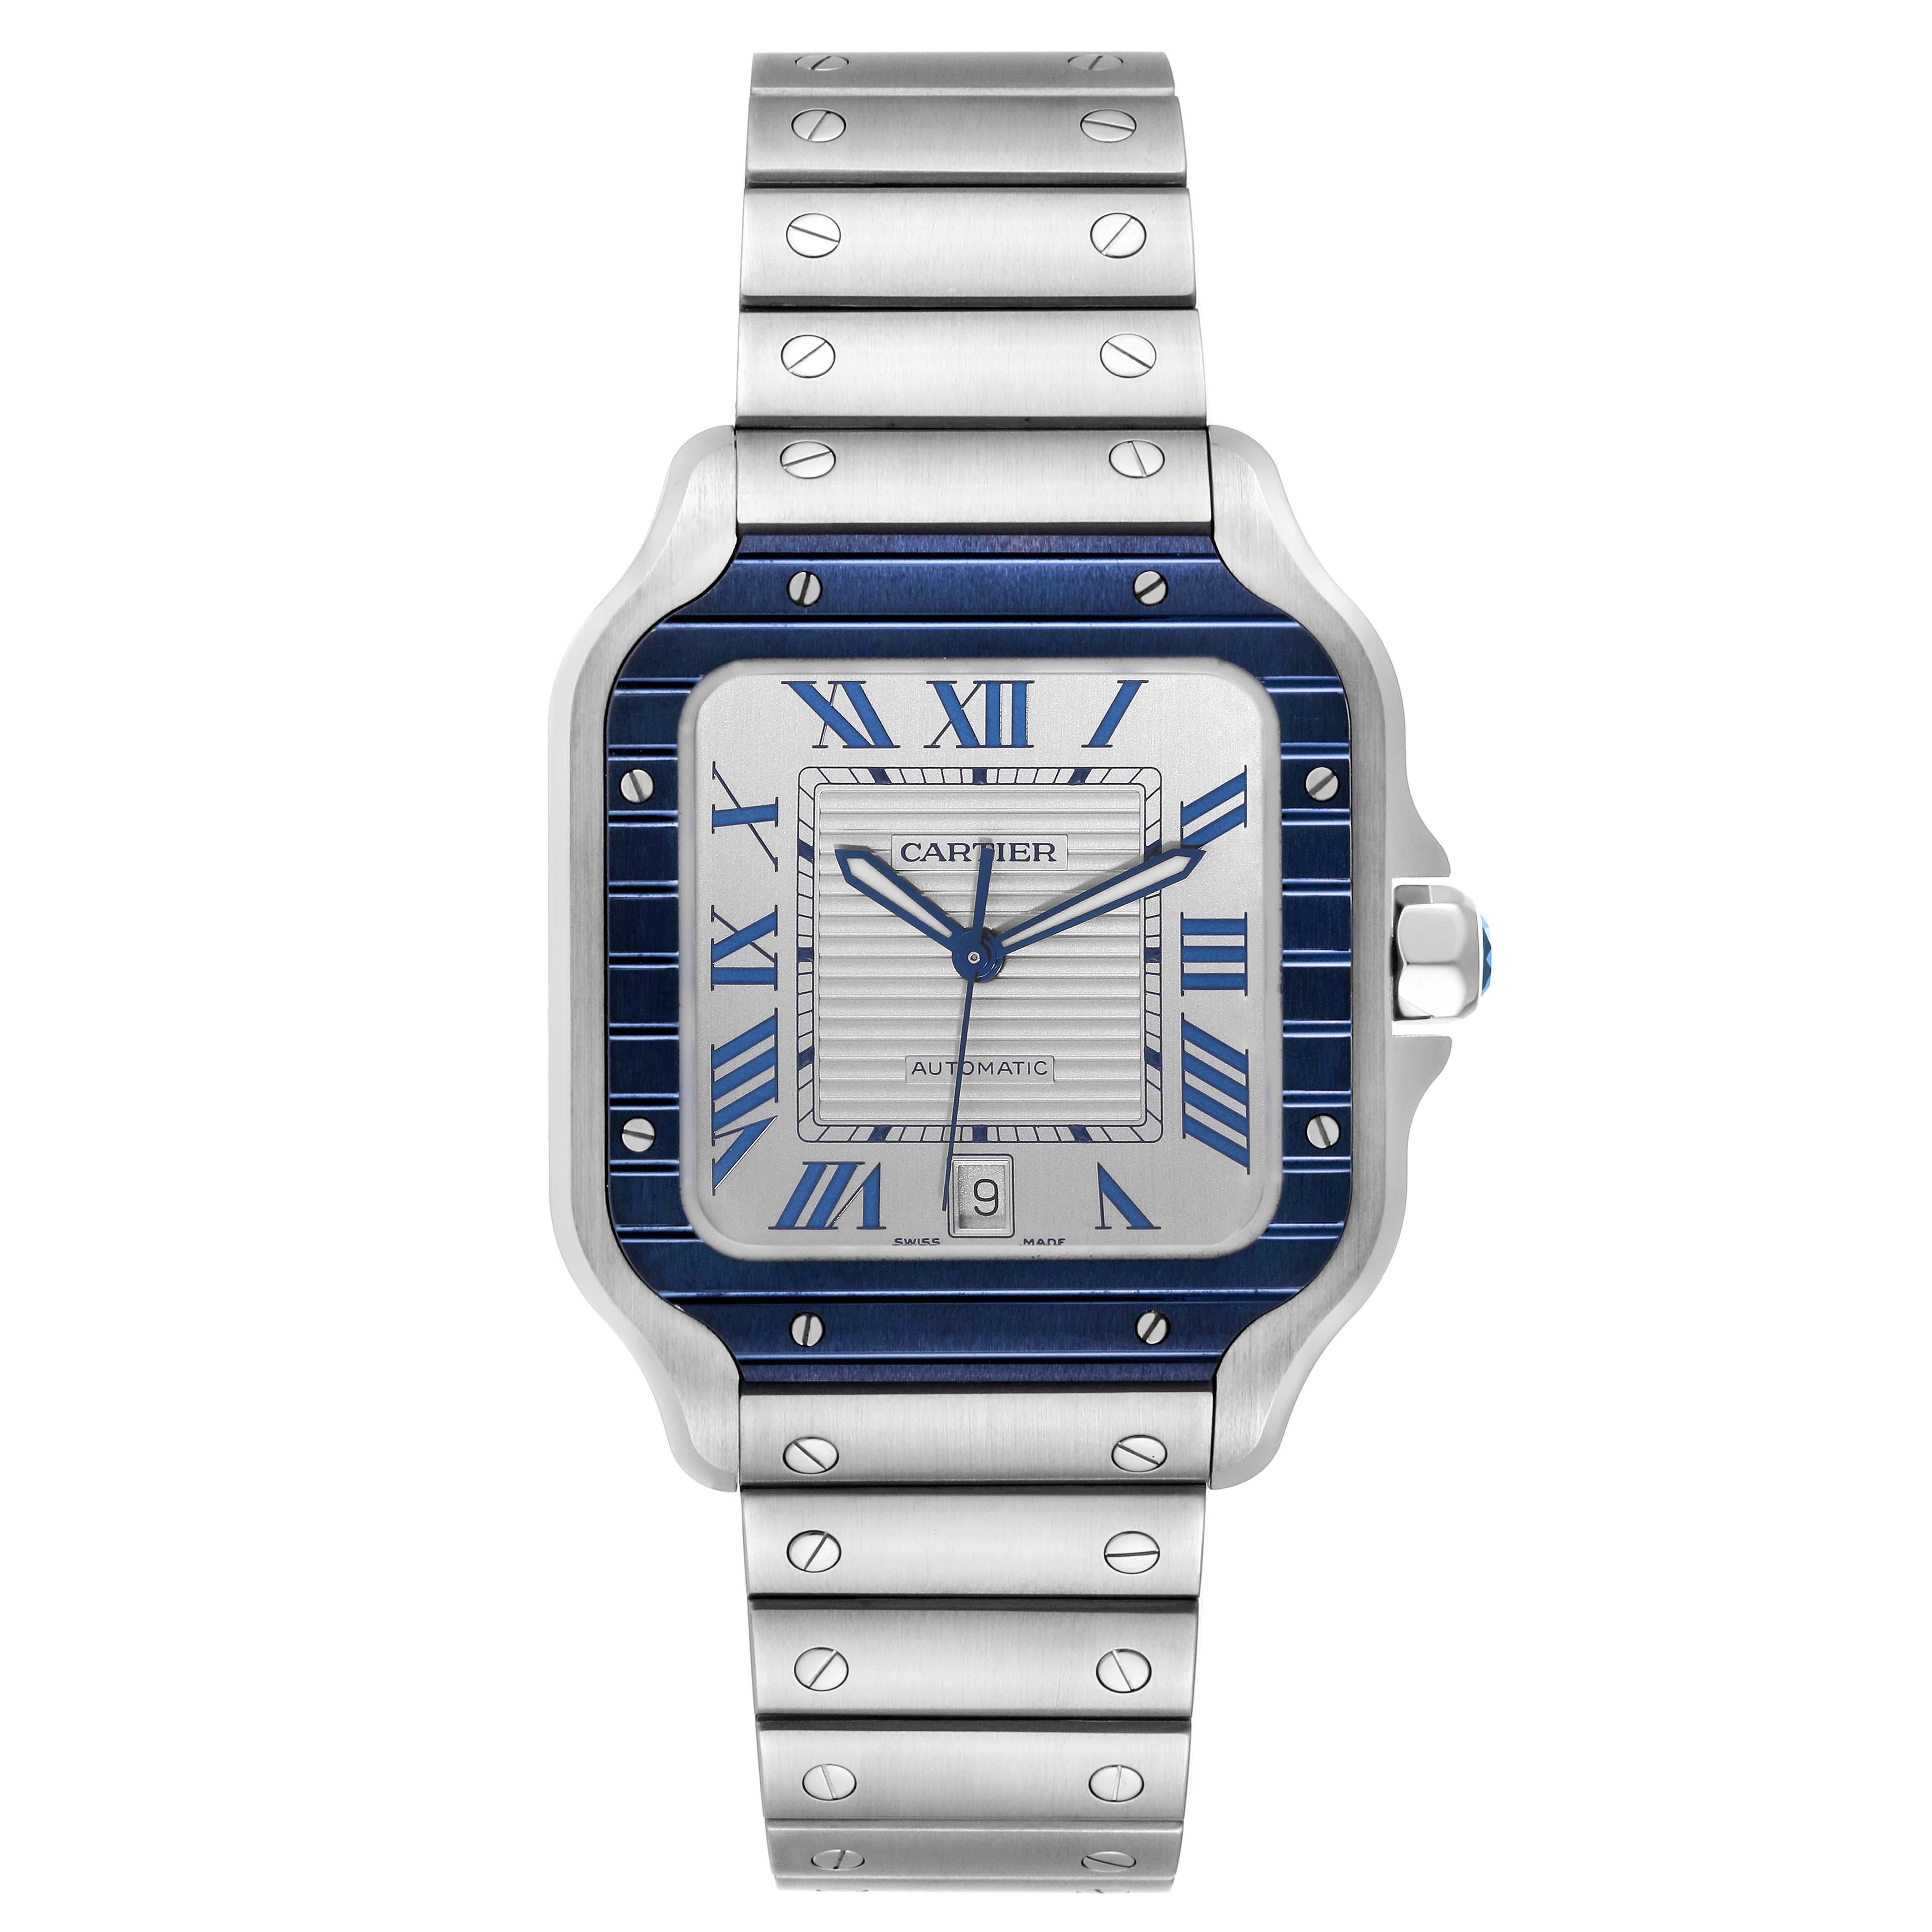 Cartier Santos Large Stainless Steel PVD Silver Dial Mens Watch WSSA0047 Unworn. Automatic self-winding movement. Stainless steel case 39.8 x 47.5 mm. Octagonal crown set with a faceted blue spinel. Blue PVD bezel punctuated with 8 signature screws.